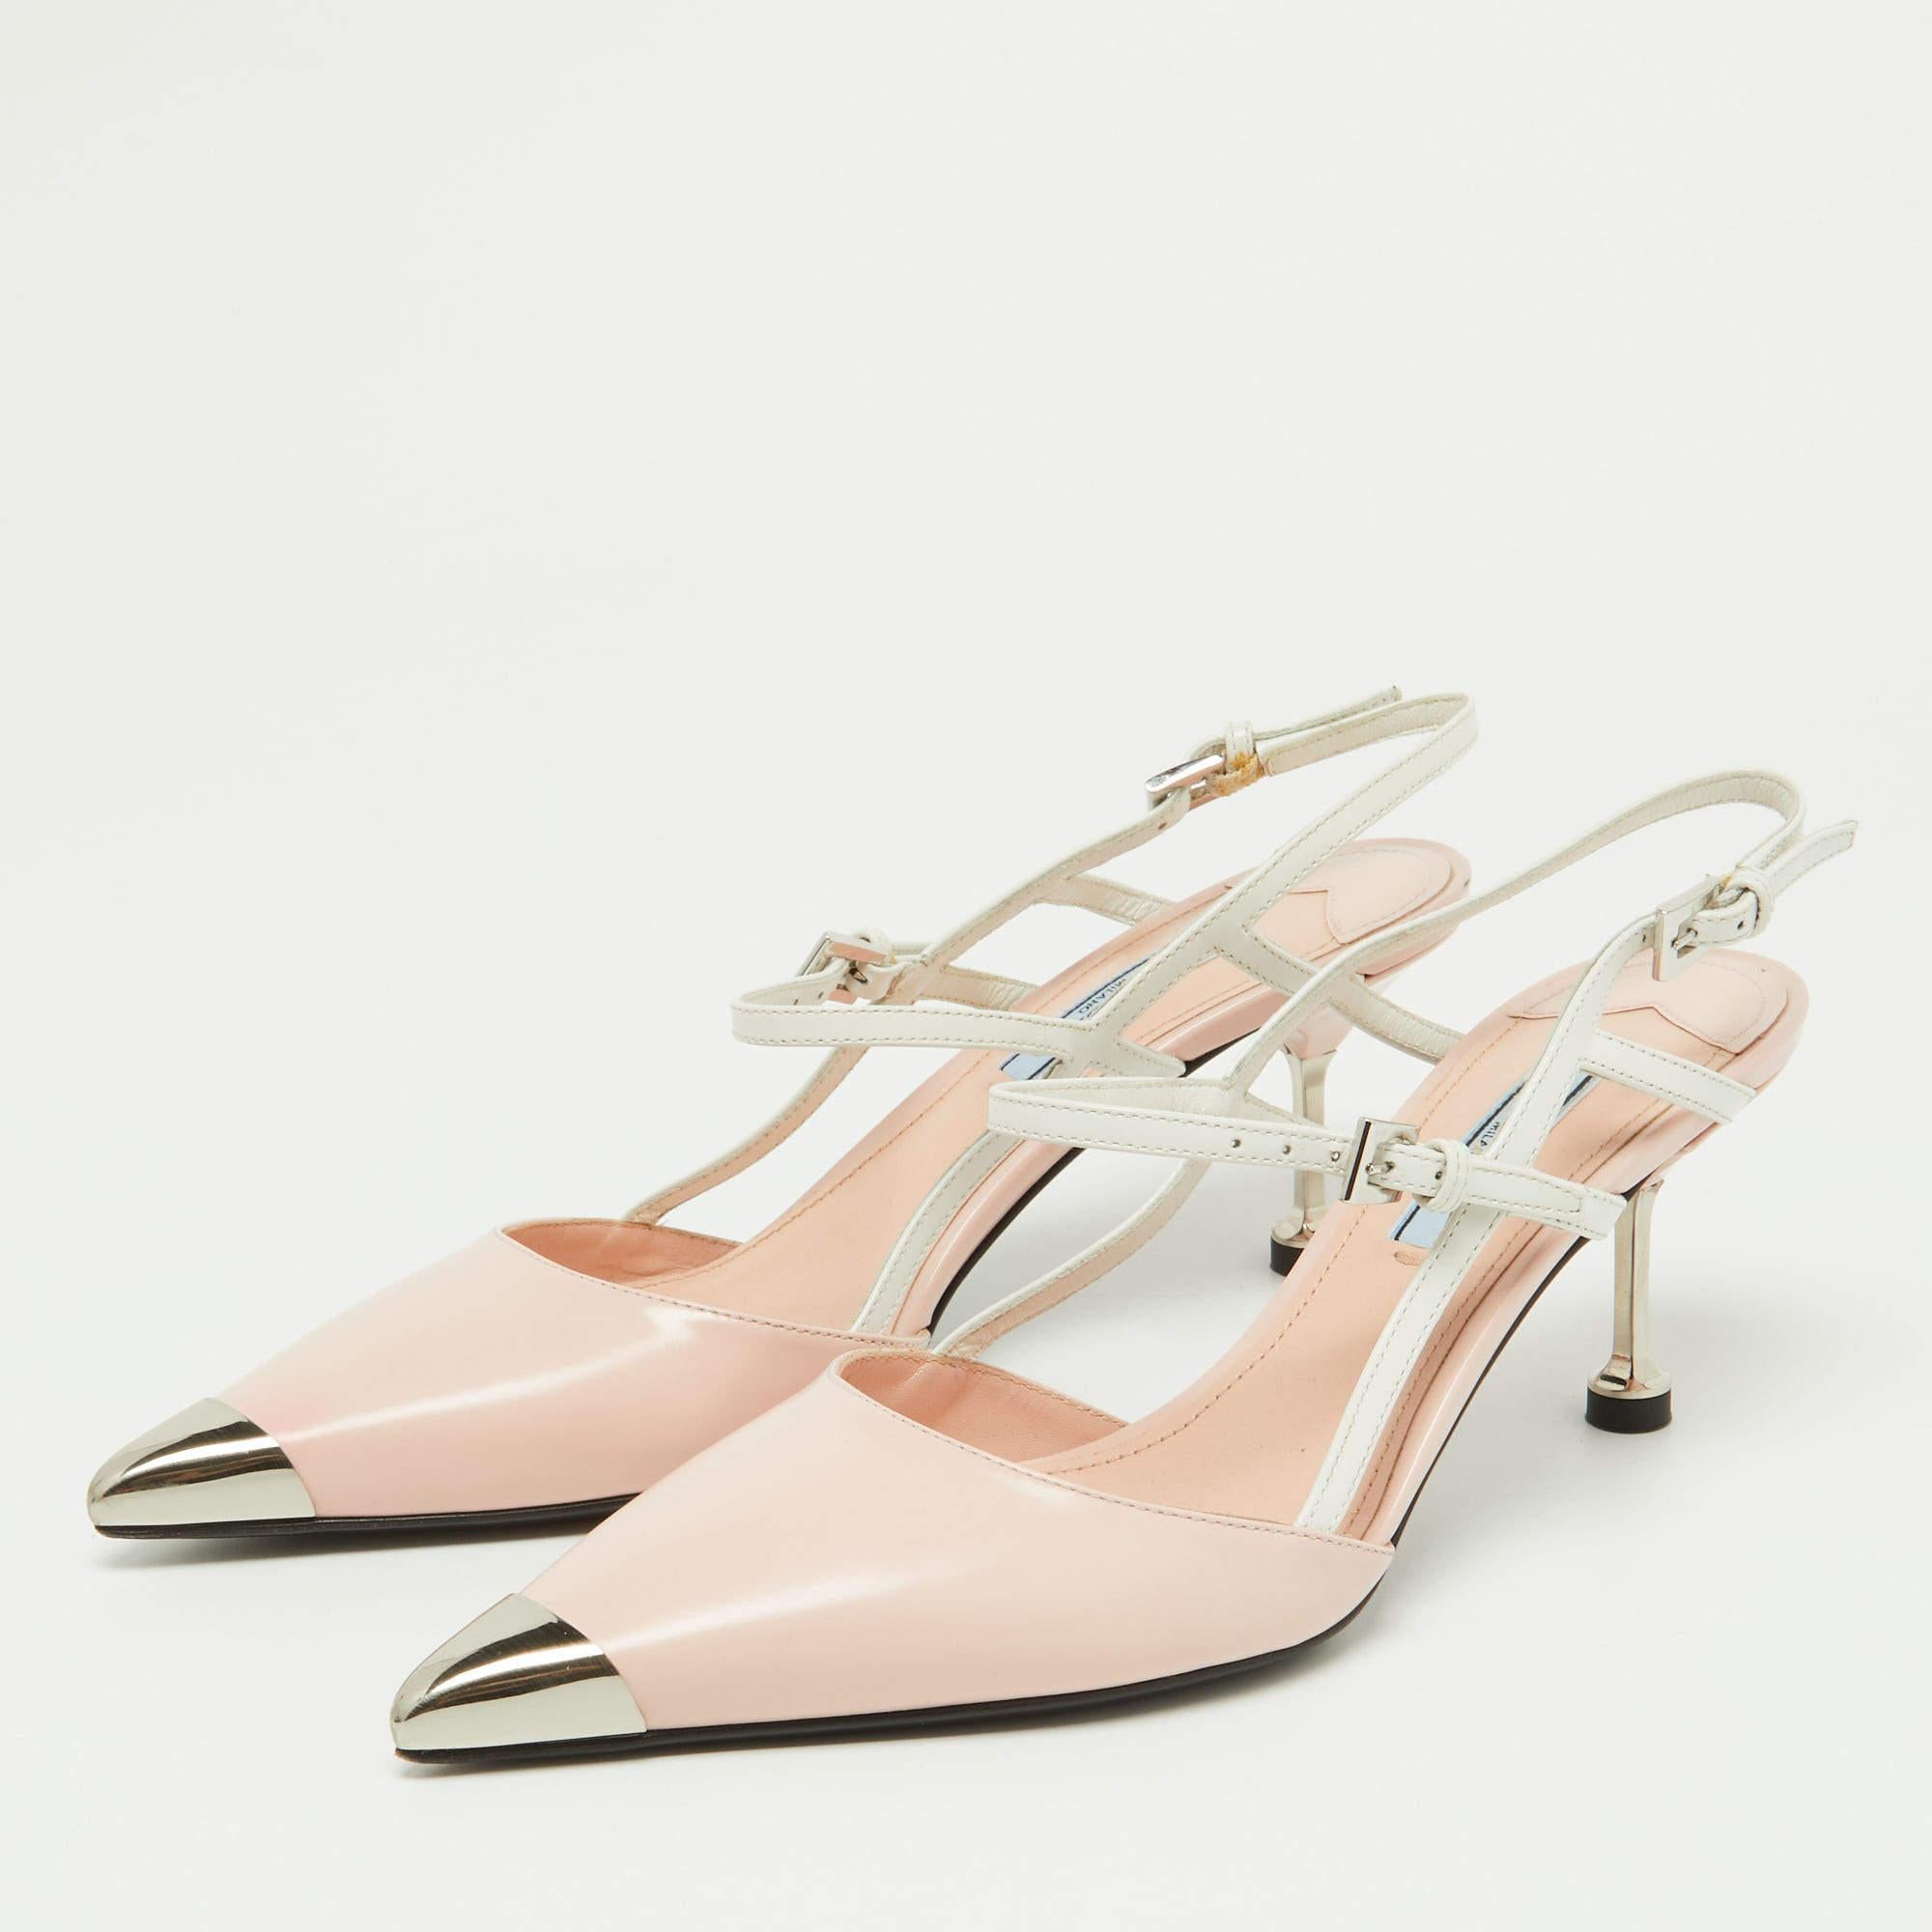 Prada Pink/White Leather Pointed Toe Slingback Pumps Size 38 4